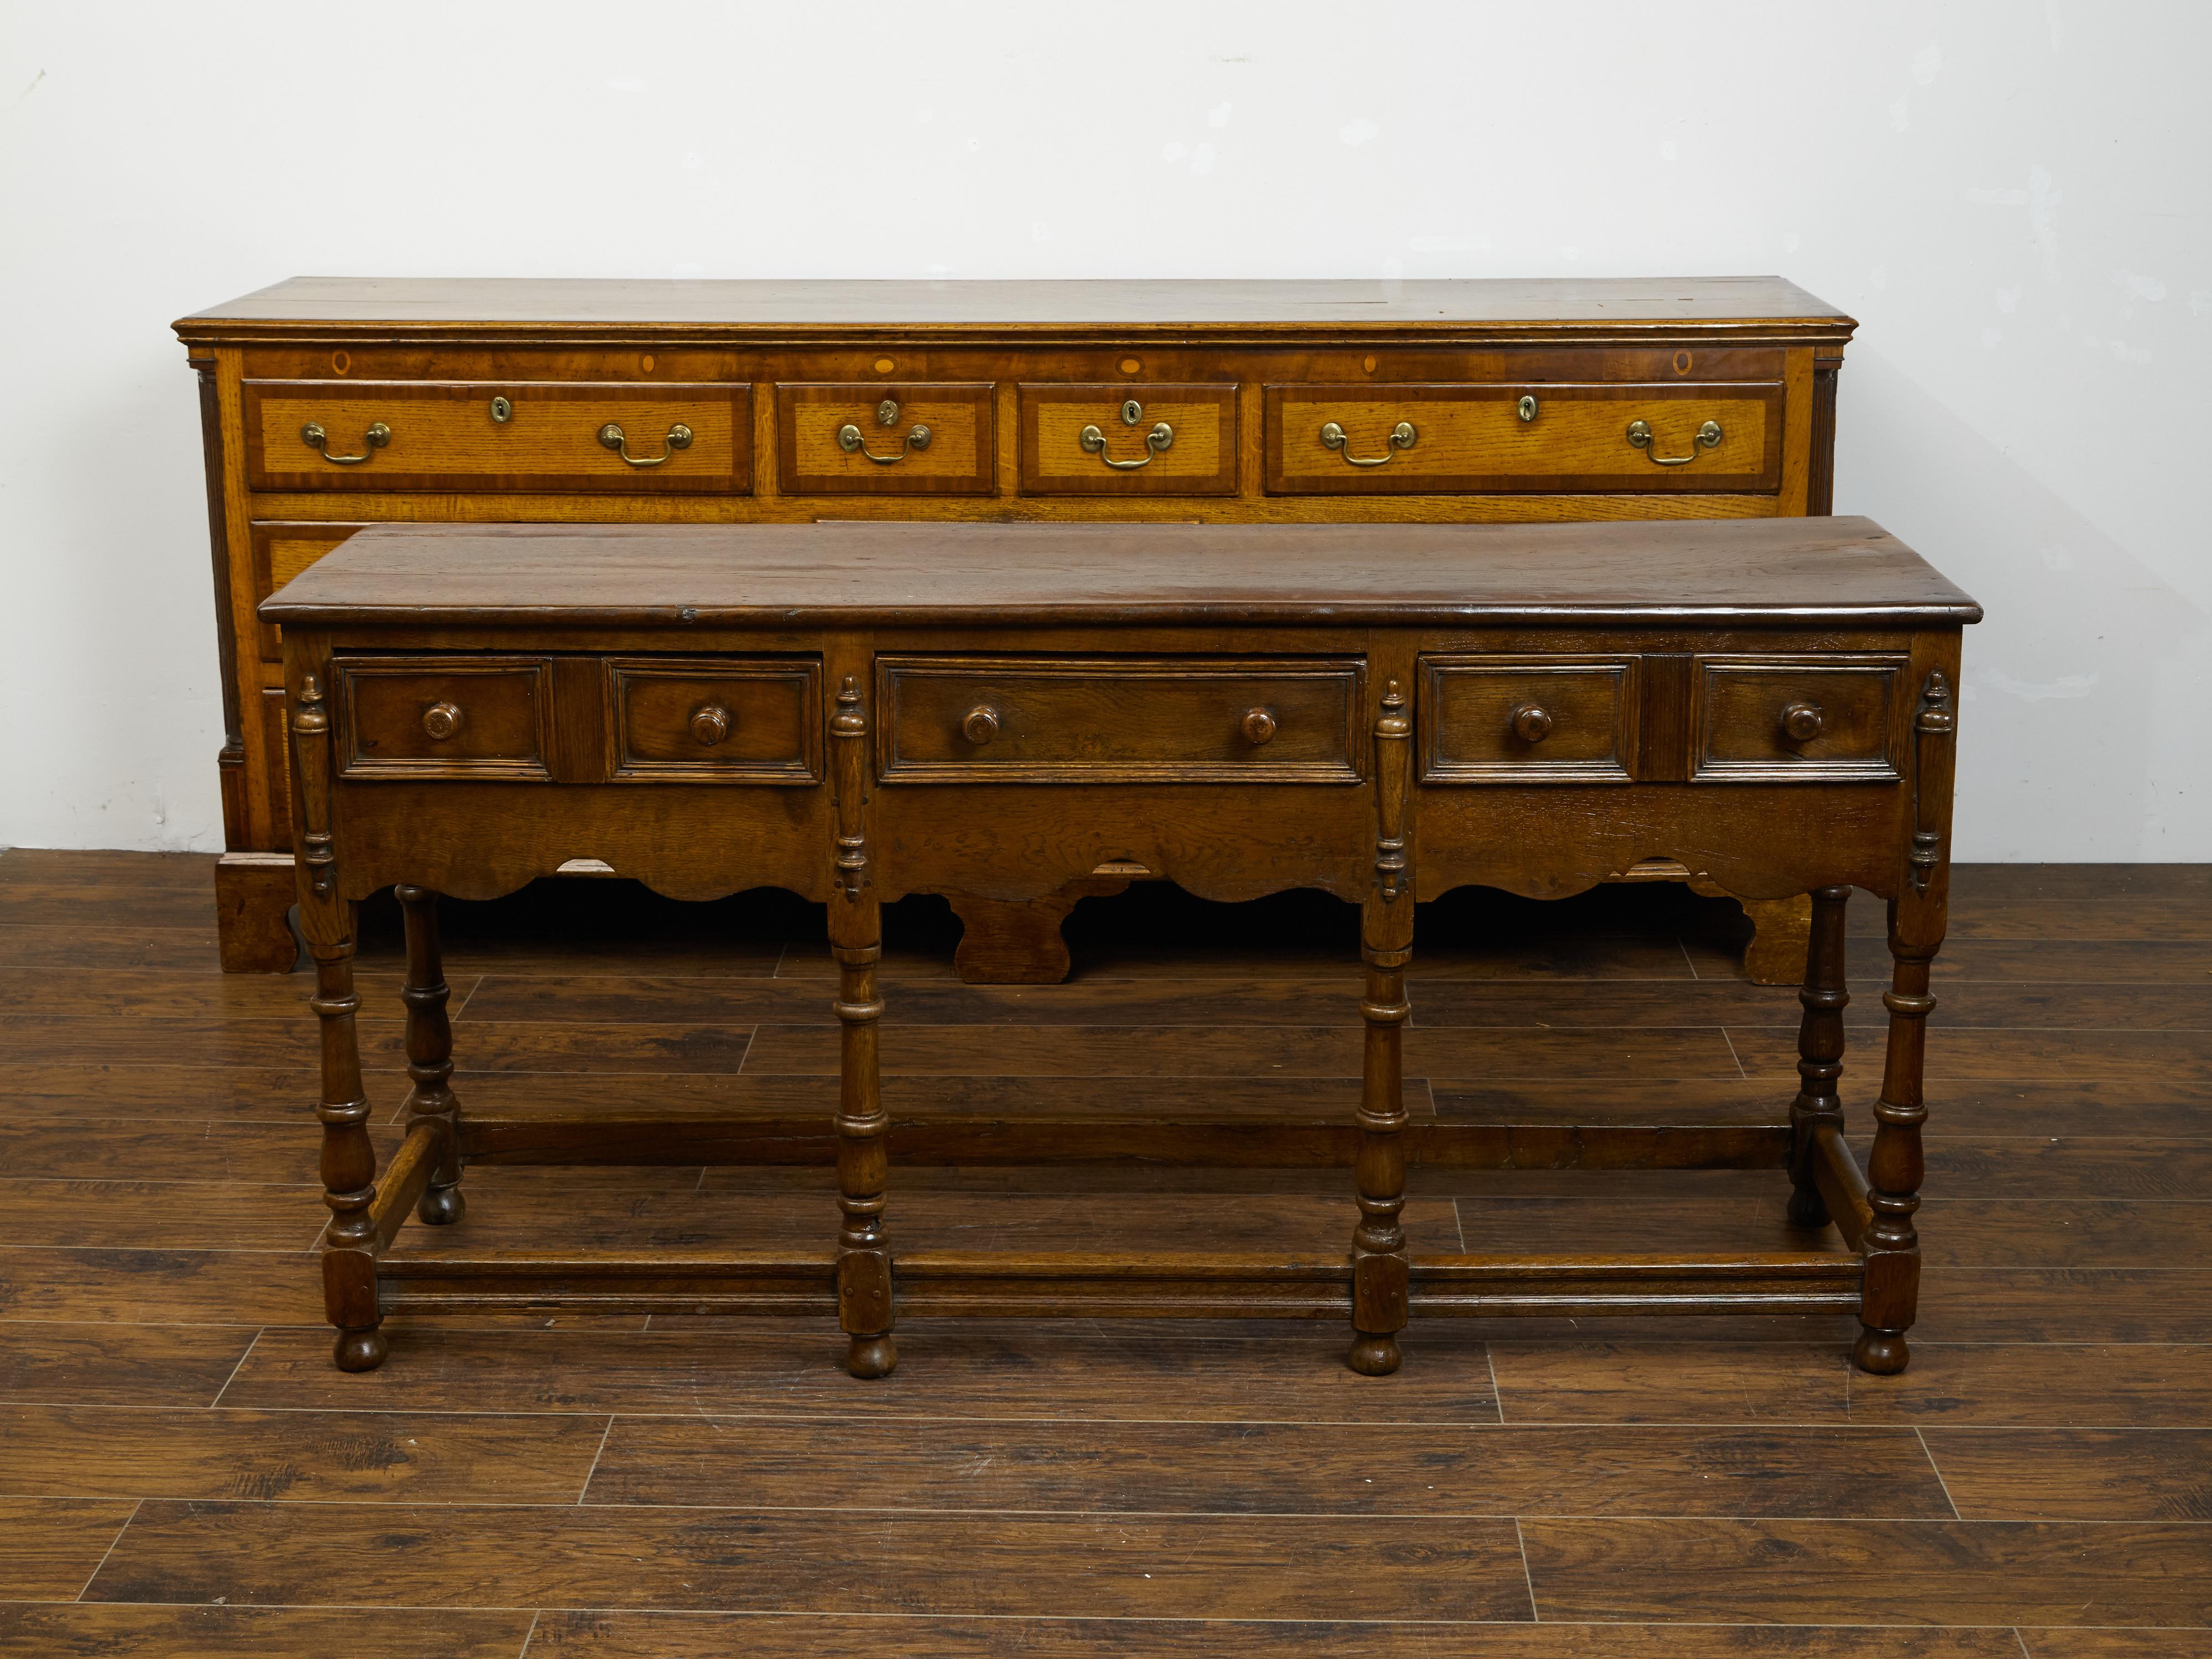 An English oak dresser base from the mid 19th century, with three drawers, scalloped apron and turned legs. Created in England during the third quarter of the 19th century, this oak dresser base features a rectangular top sitting above three drawers